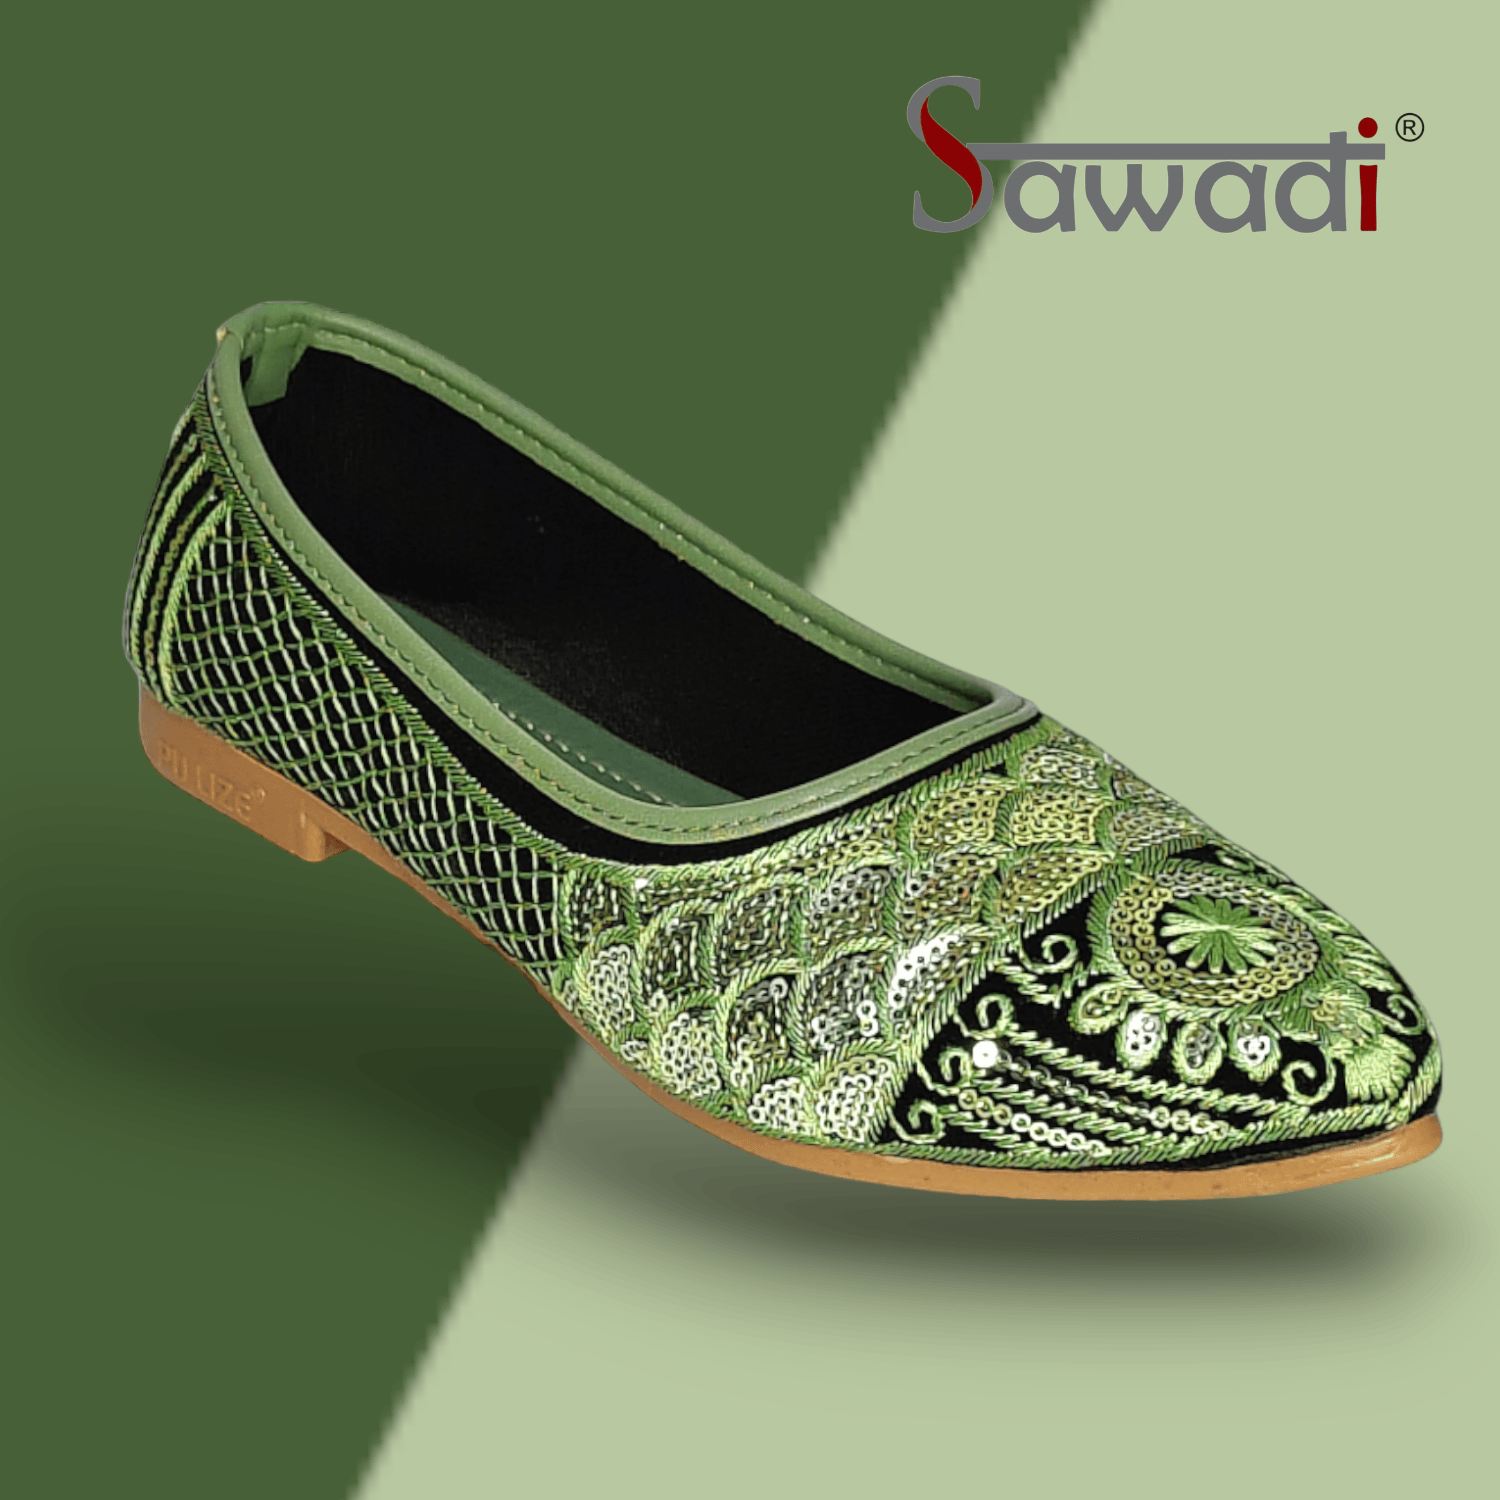 SAWADI | Embroidery bellies |Comfortable Ethnic Sandal Fashionable Bellies For Women's and Girl's undefined